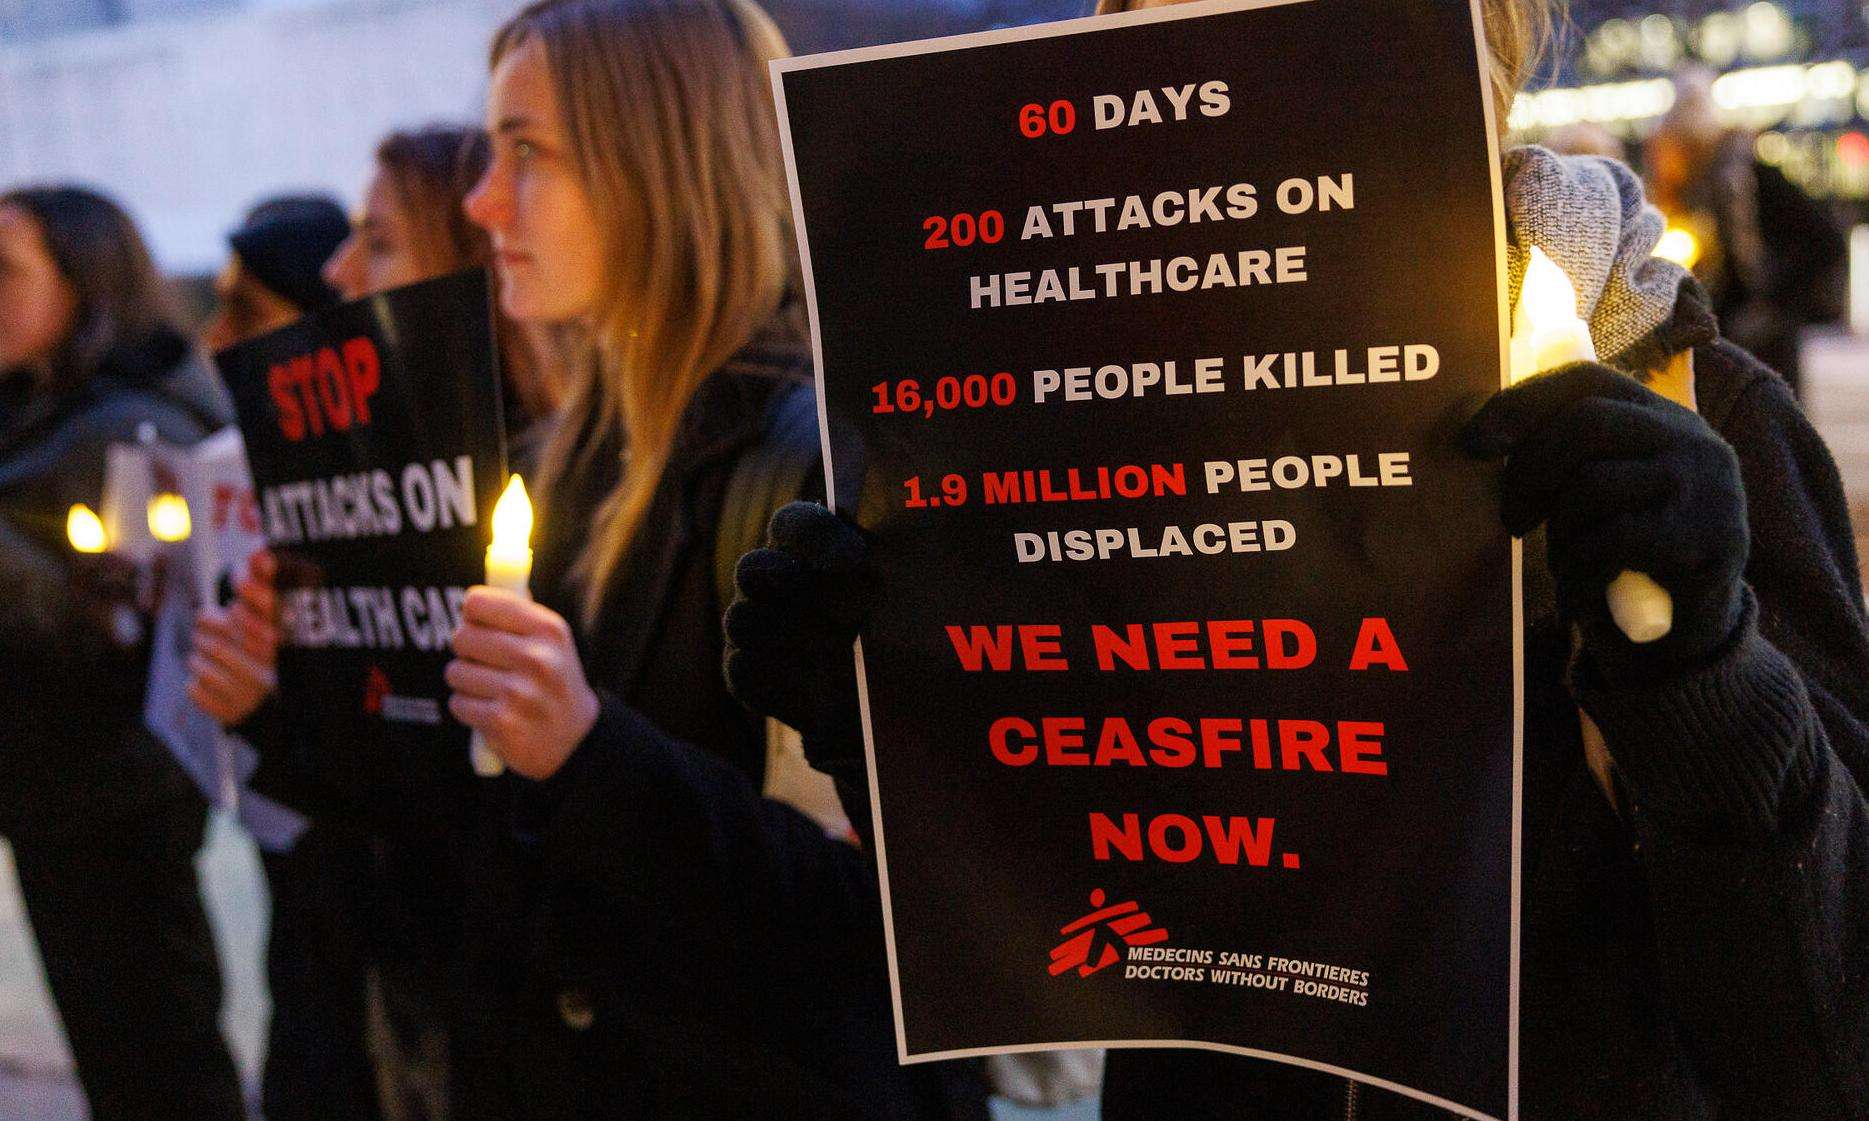 MSF-USA staff hold signs calling for a ceasefire in Gaza during a vigil at the United Nations in New York.